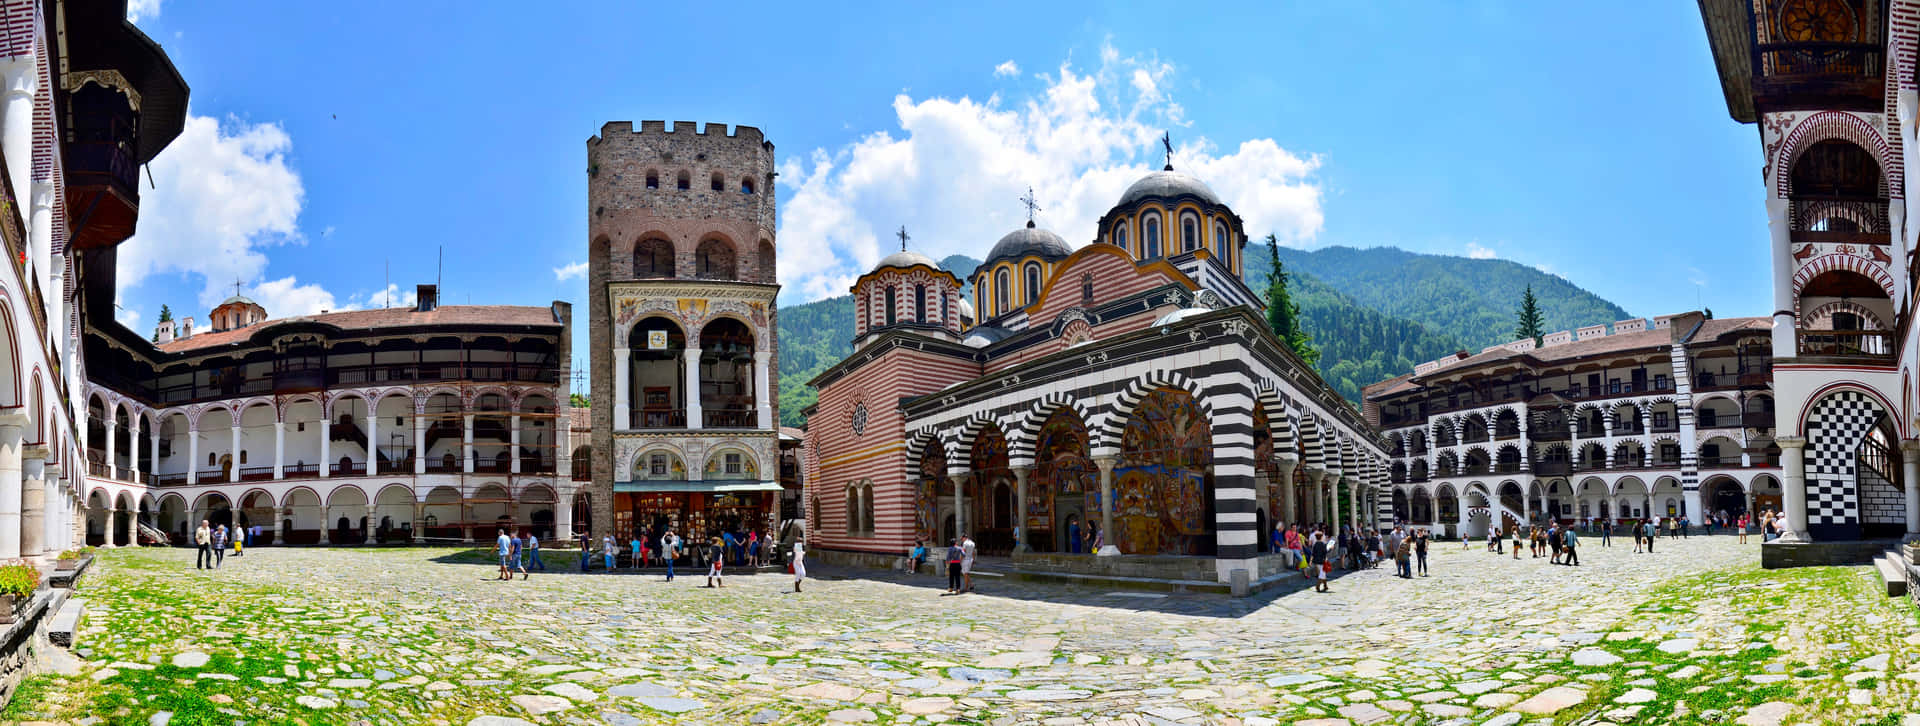 Majestic View of Rila Monastery Under Clear Skies Wallpaper